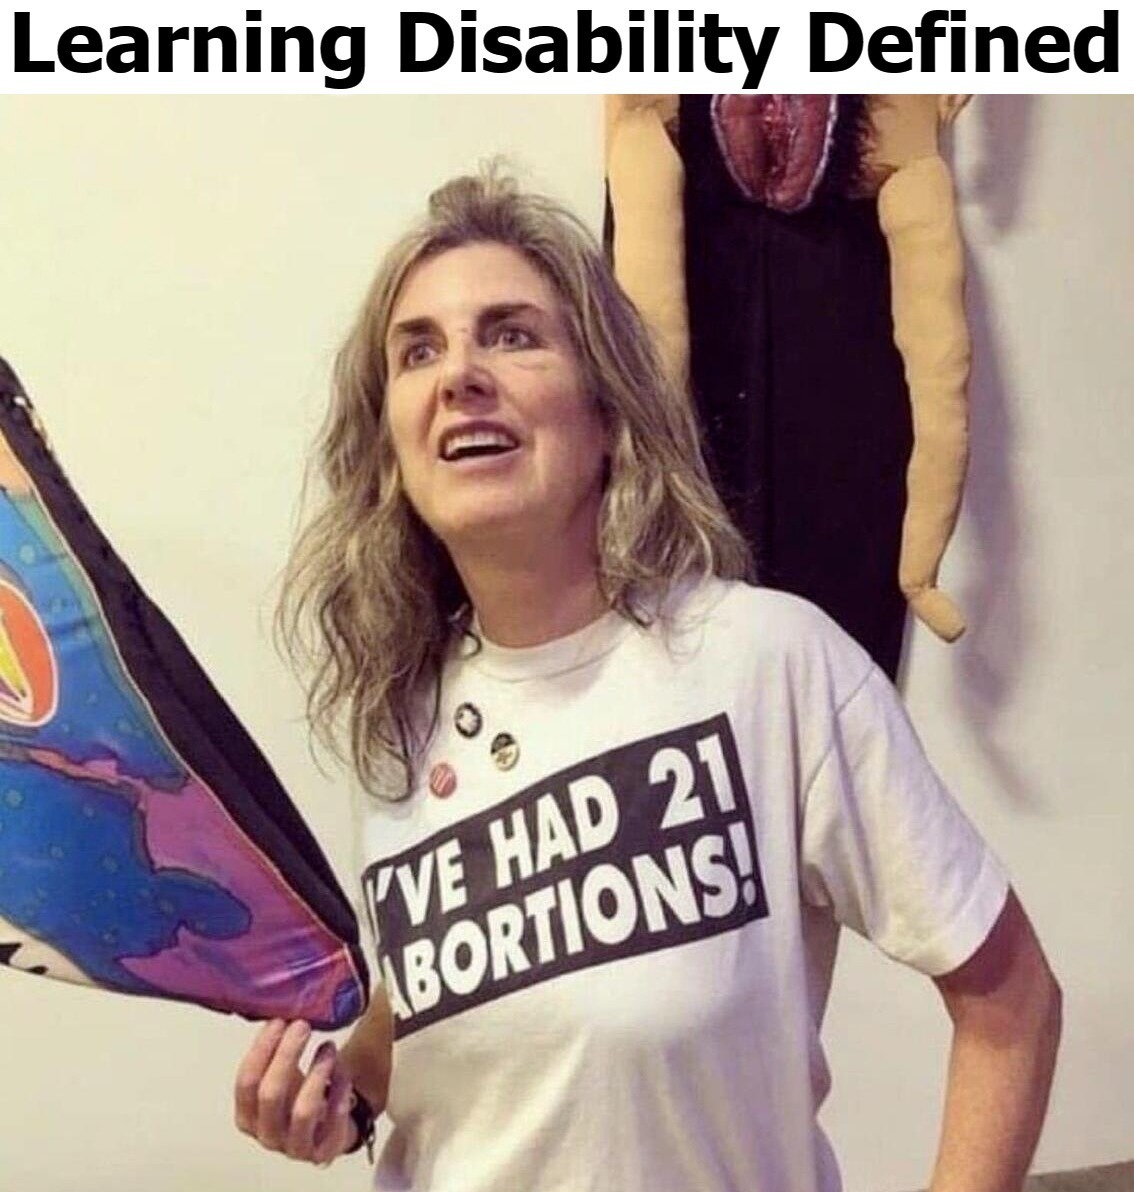 Learning Disability Defined | image tagged in learning disability,21 abortions,liberalism,mental illness,weapon of mass destruction,the murderer | made w/ Imgflip meme maker